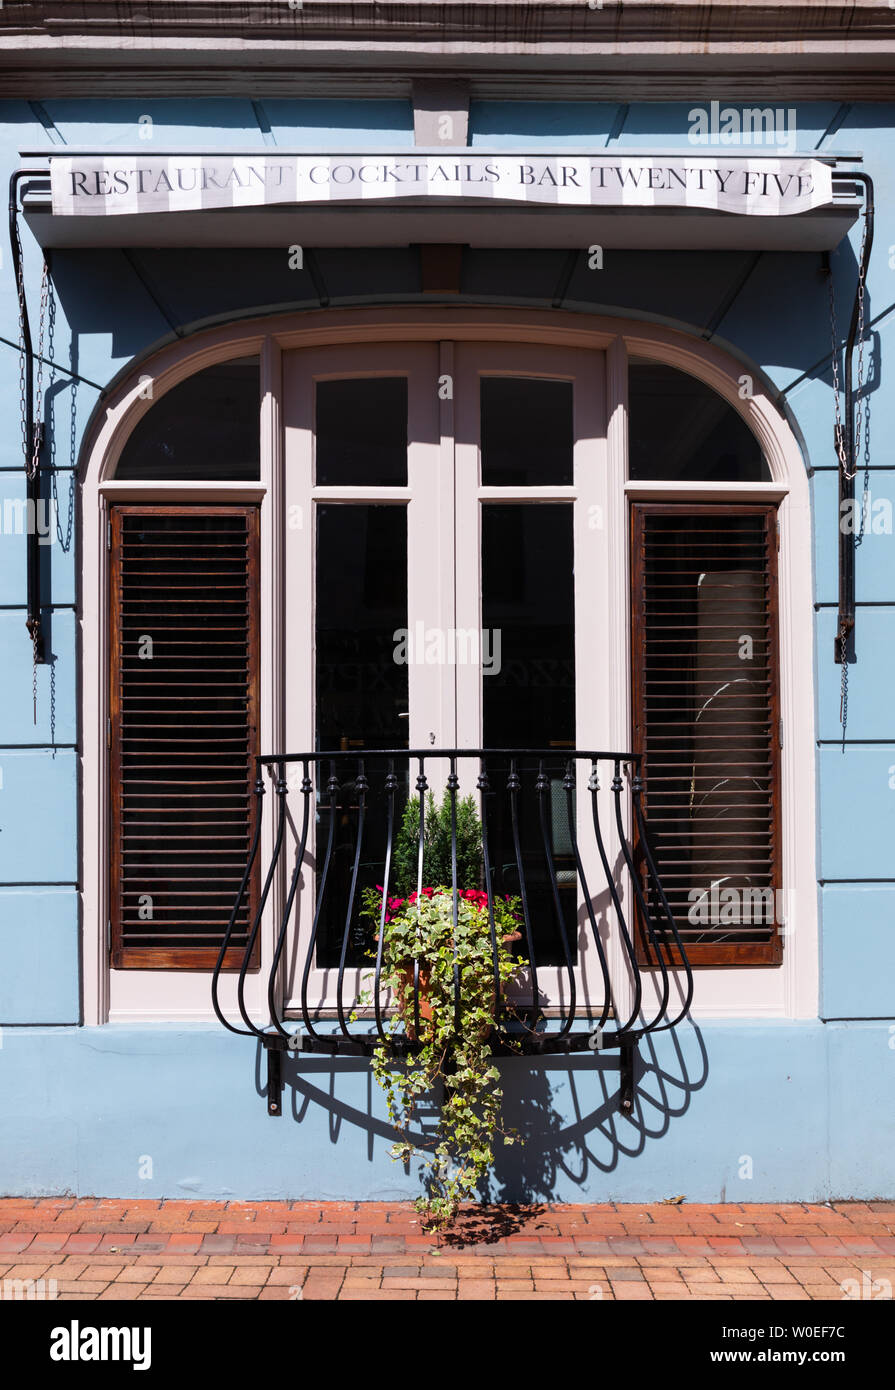 Rugby, Warwickshire, UK: An arched window with shutters and railings in a blue wall. A pot contains flowers and ivy trails to the floor. Stock Photo